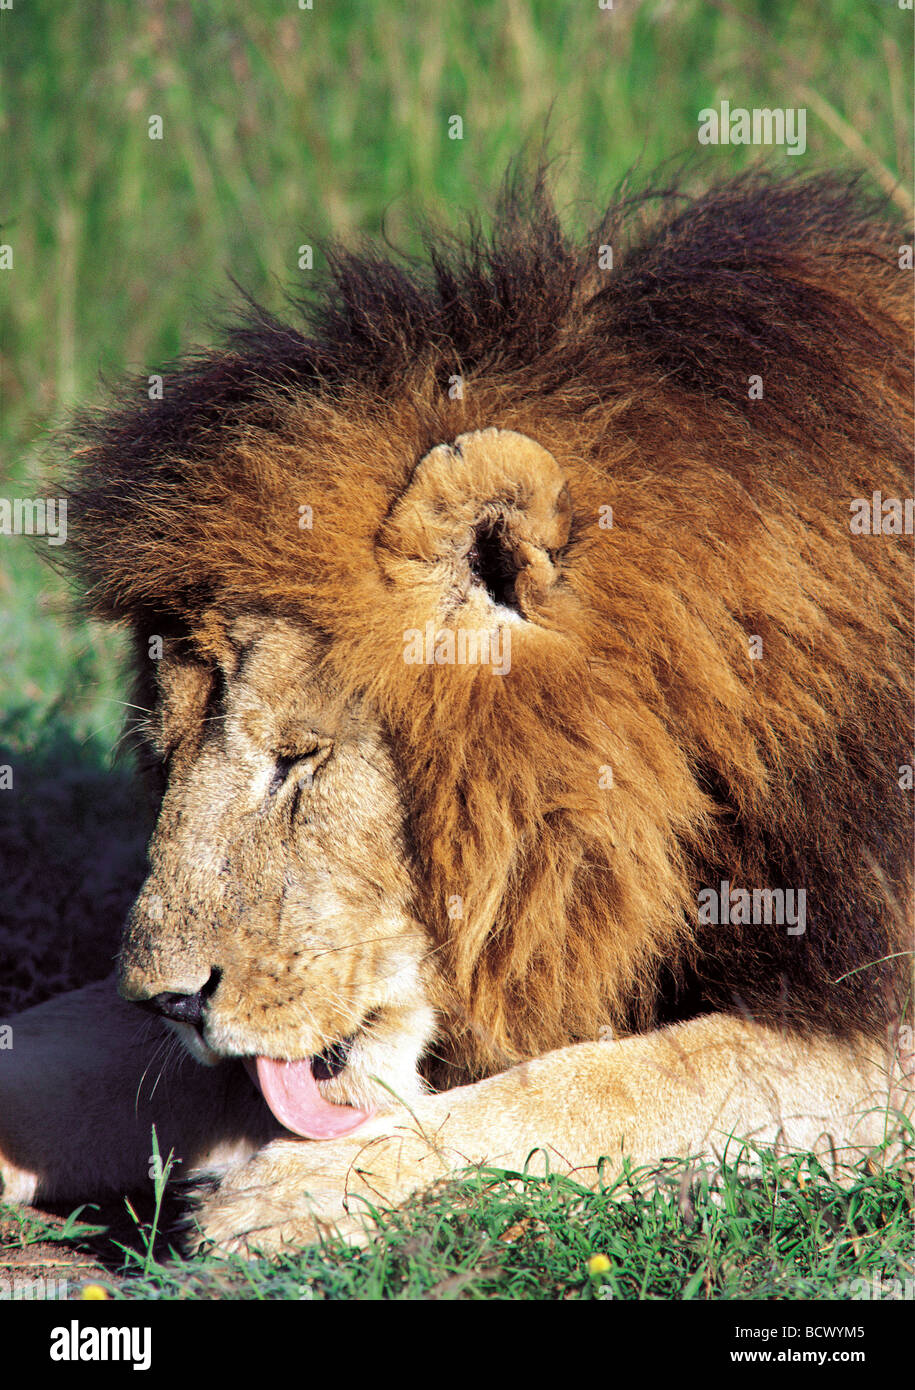 Male Lion with fine dark mane grooming cleaning licking paw Masai Mara National Reserve Kenya East Africa Stock Photo